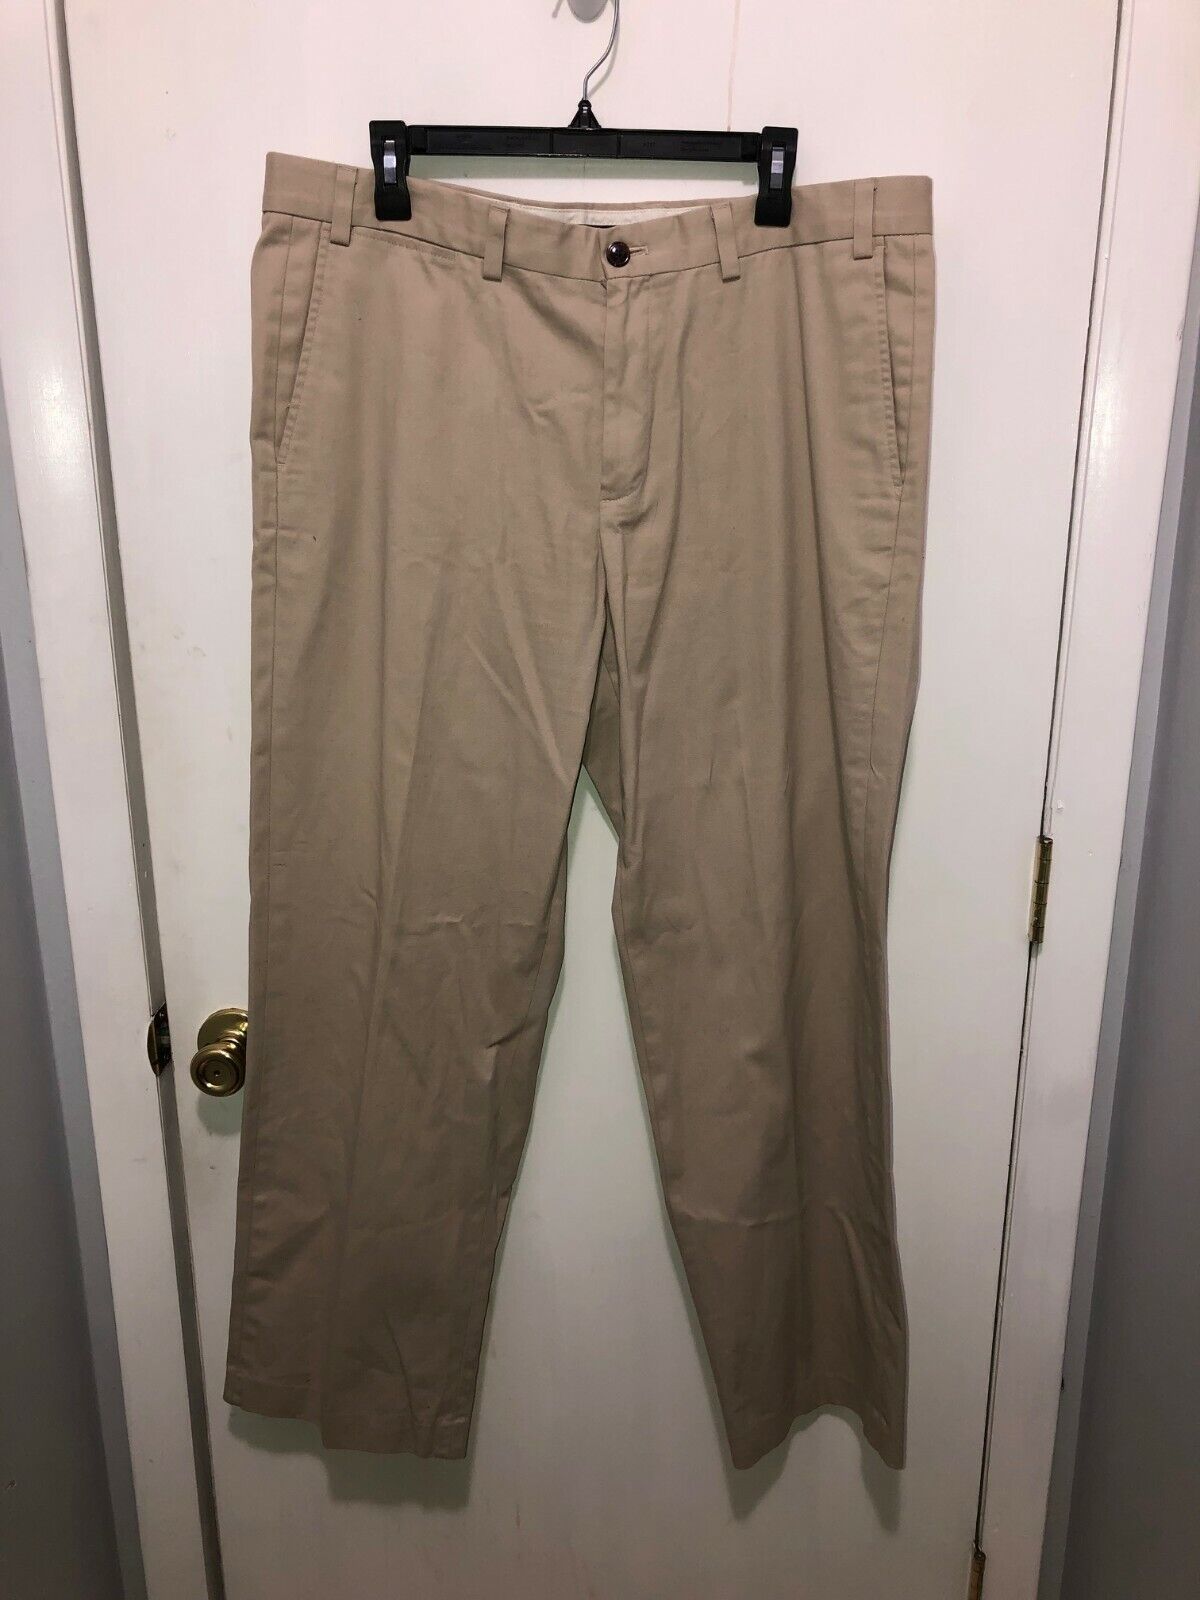 Primary image for Eddie Bauer Wrinkle Resistant Relaxed Fit Khaki Chino Pants 38X32 Real Inseam 31